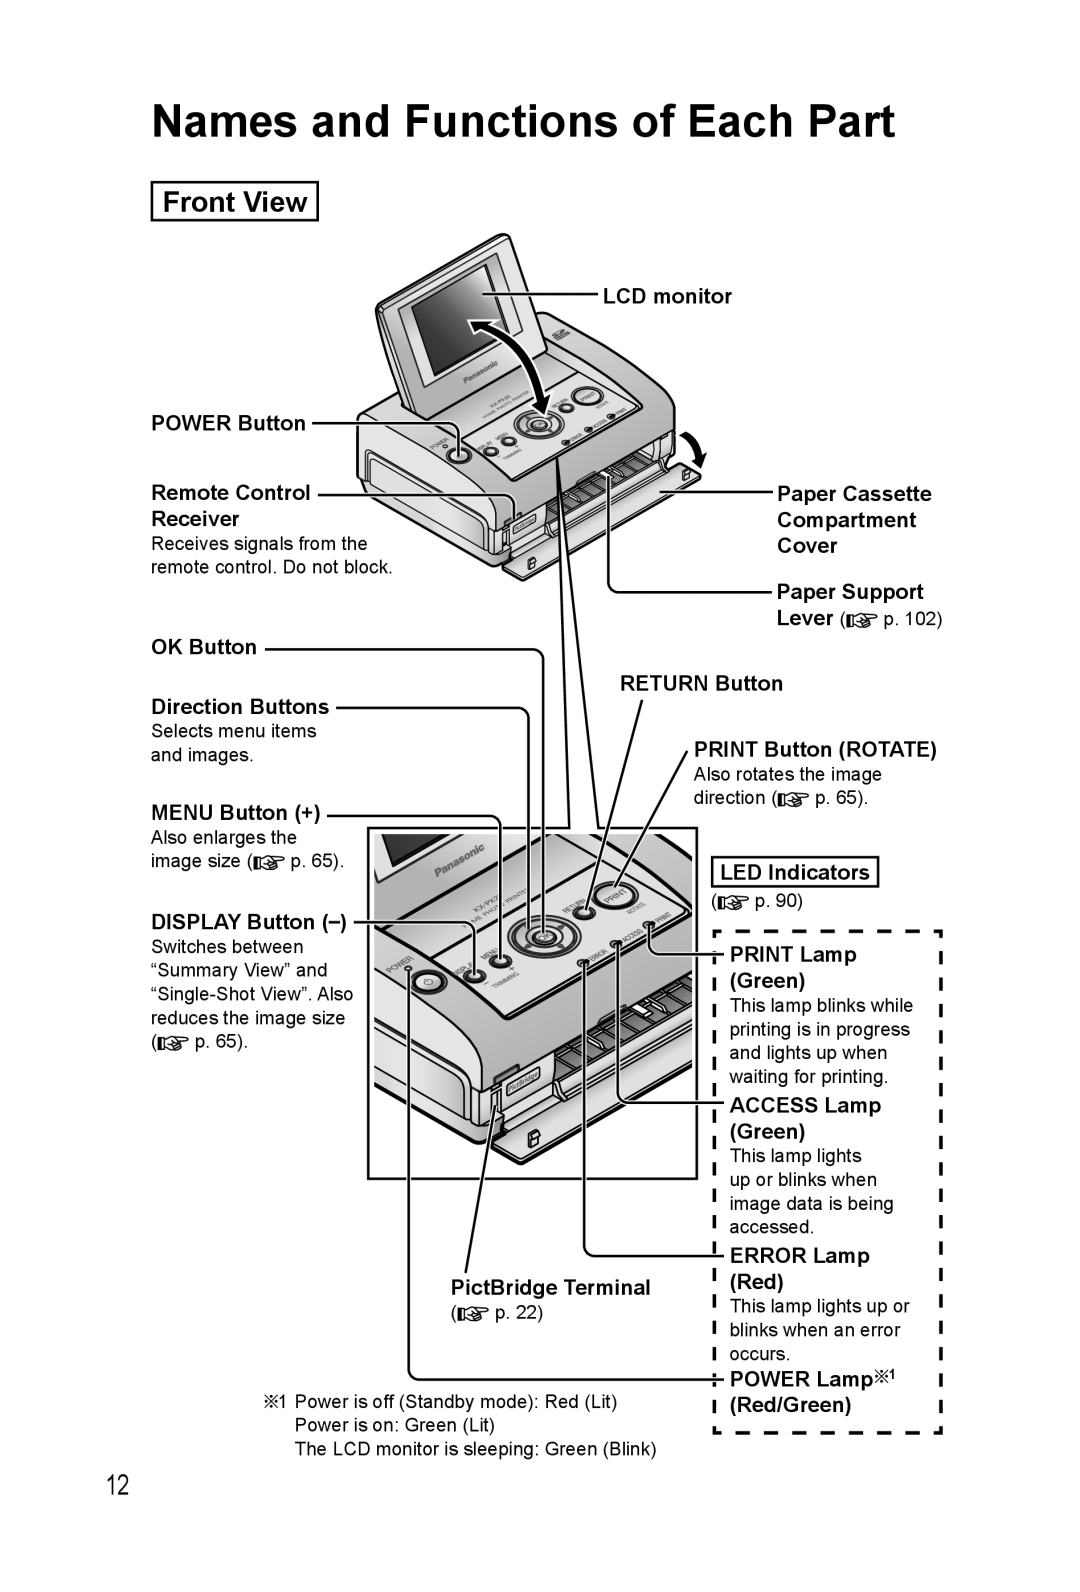 Panasonic KX-PX20M operating instructions Names and Functions of Each Part, Front View 